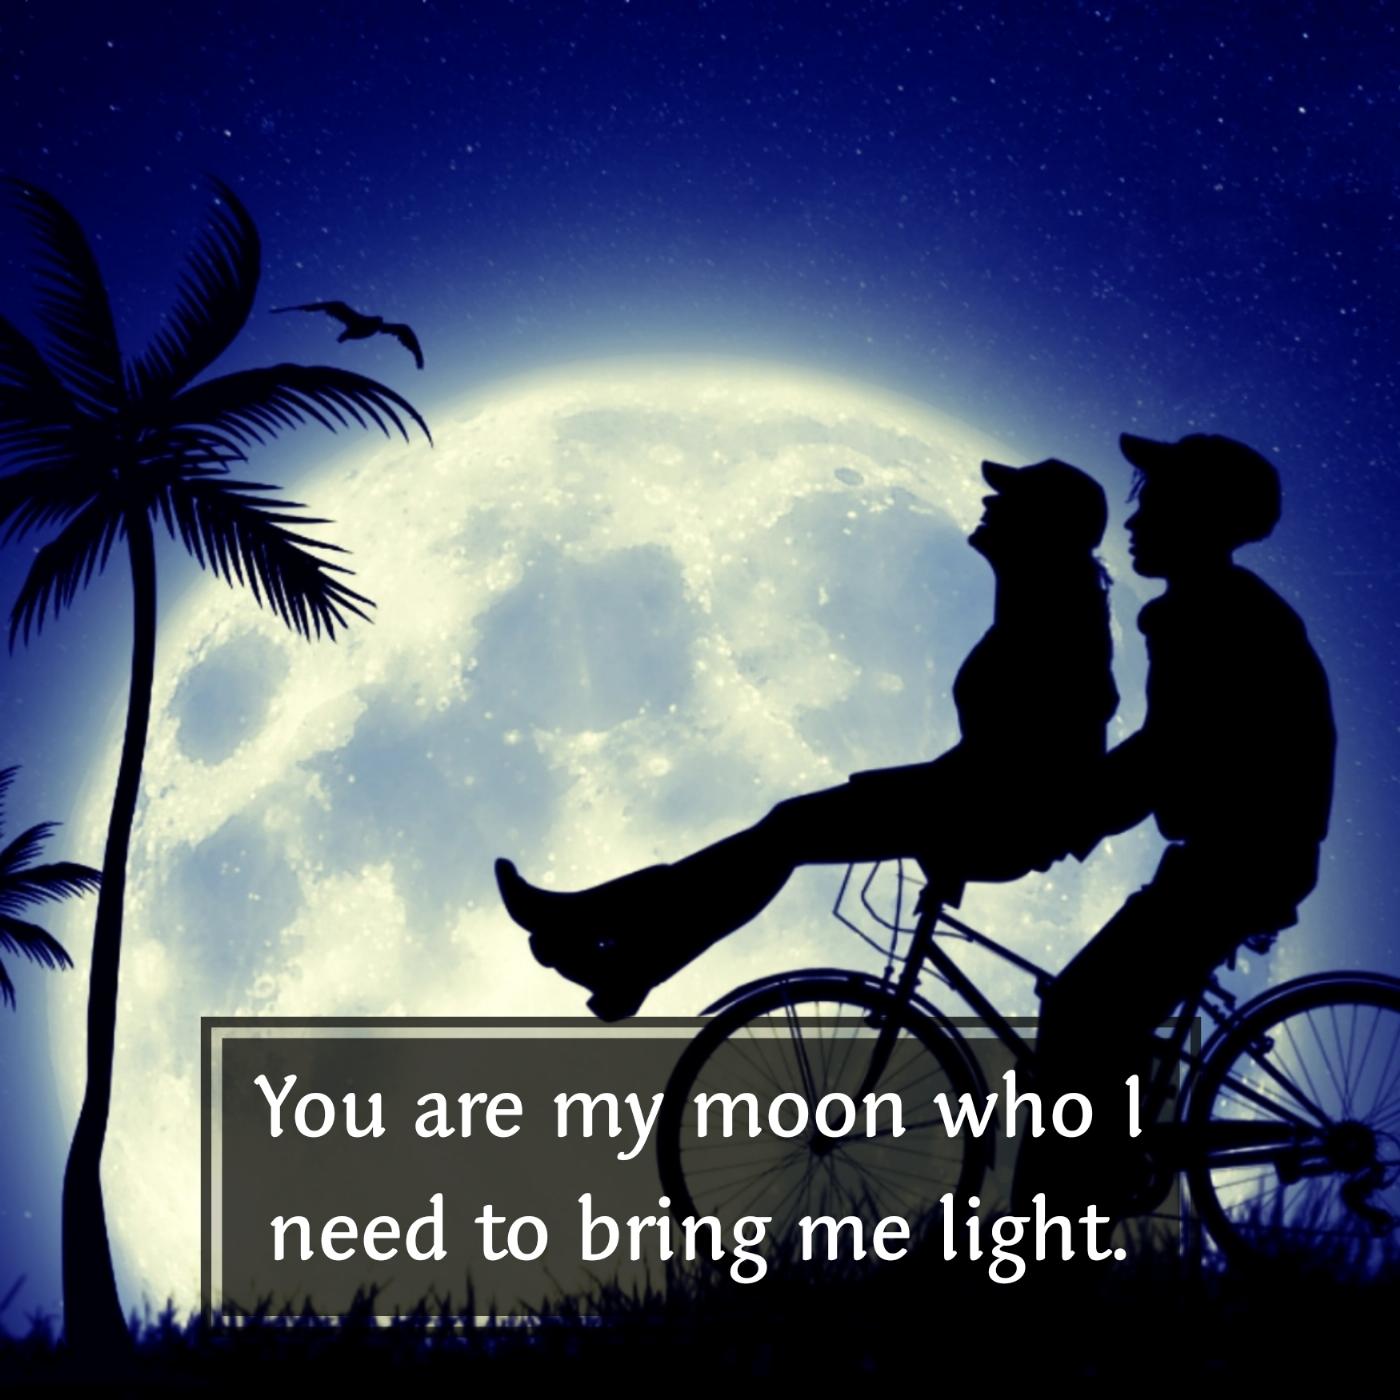 You are my moon who I need to bring me light